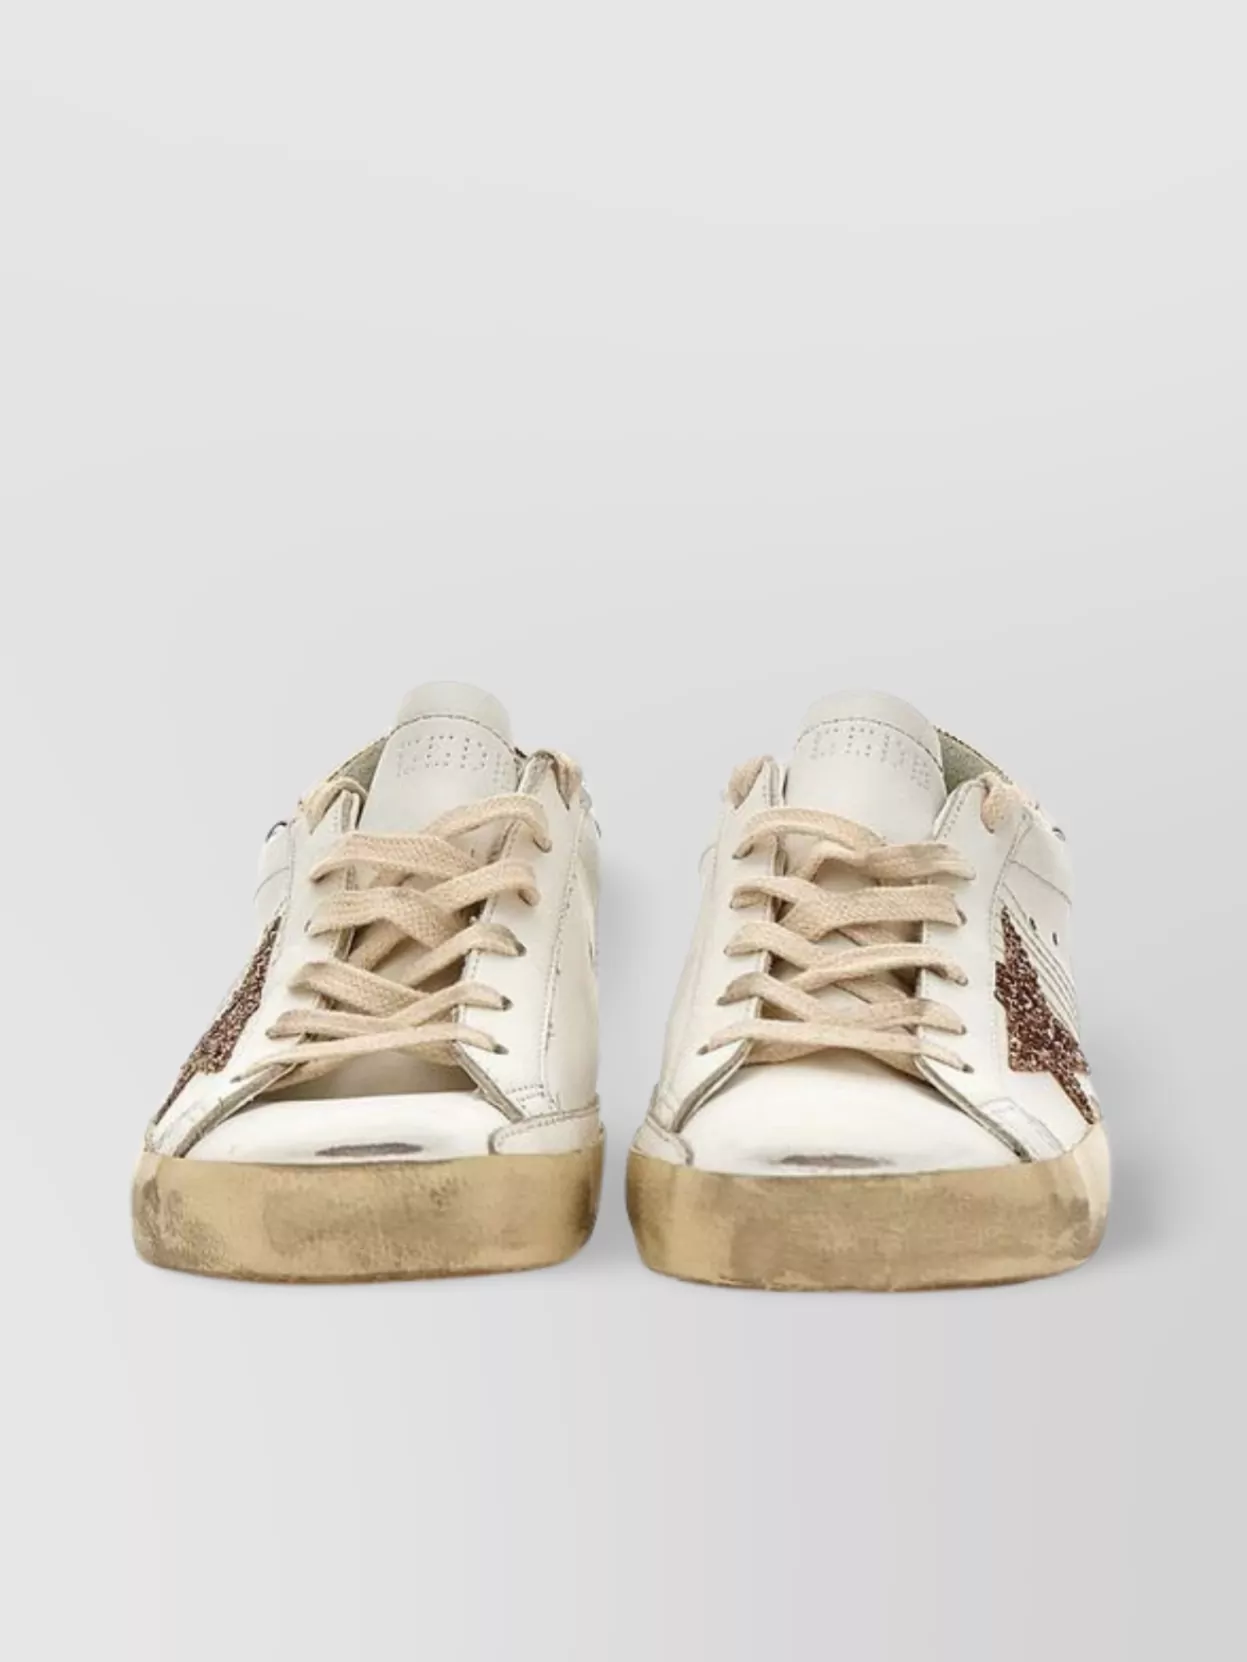 Shop Golden Goose Distressed Leather Star Sneakers